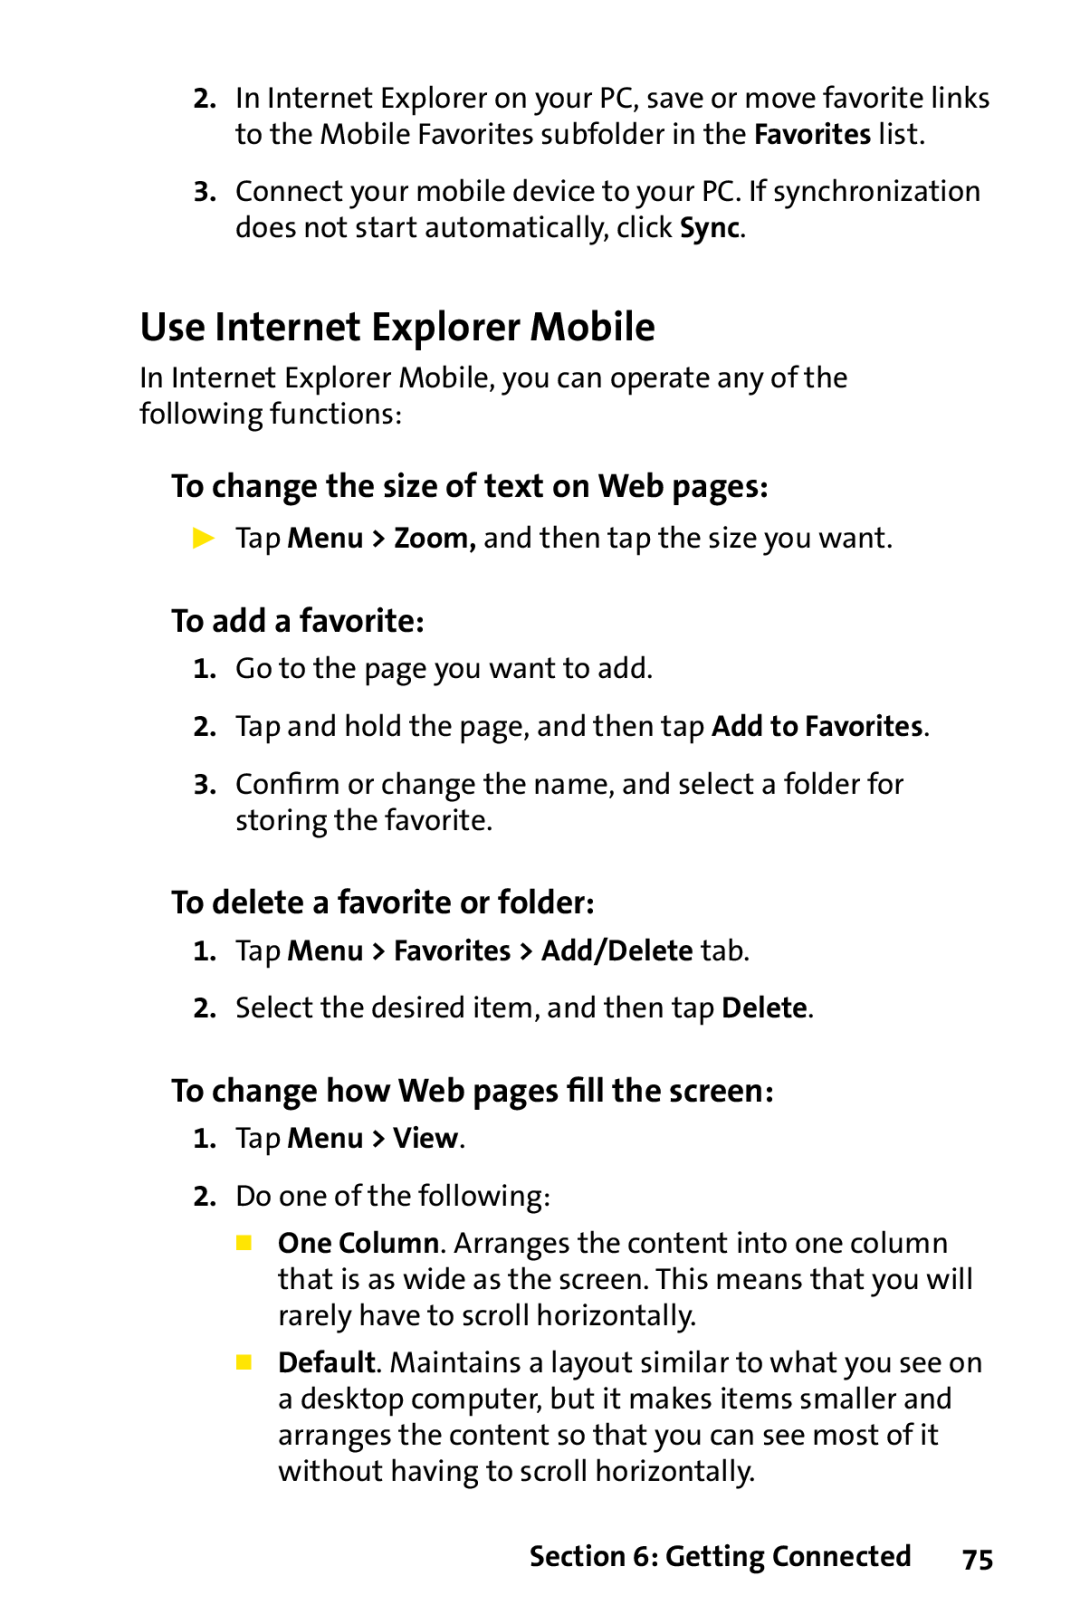 Sprint Nextel PPC-6700 manual Use Internet Explorer Mobile, To change the size of text on Web pages, To add a favorite 